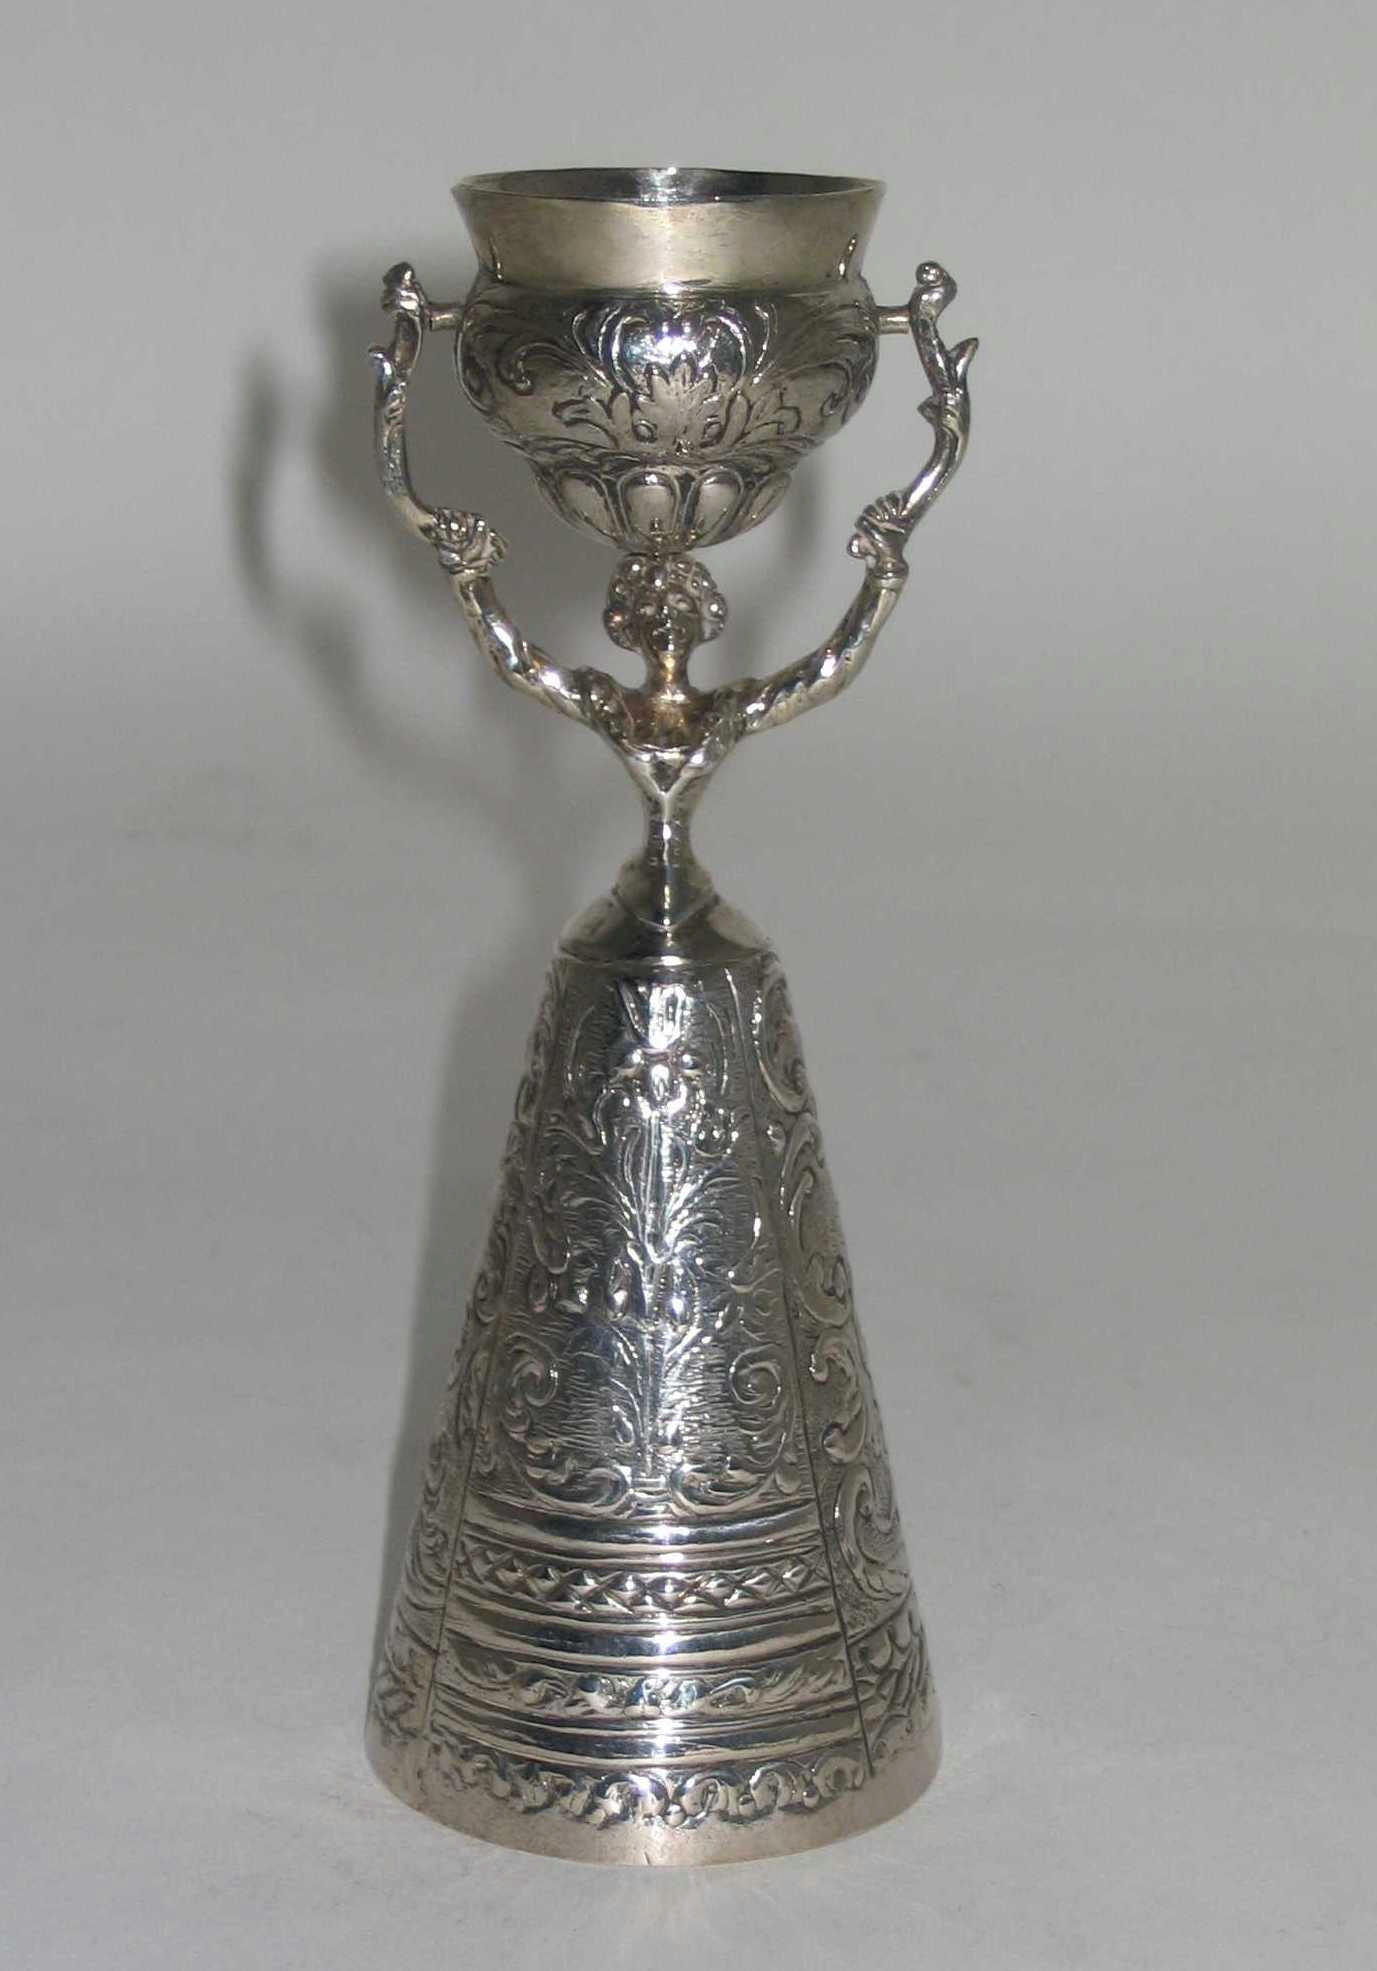 A wager cup